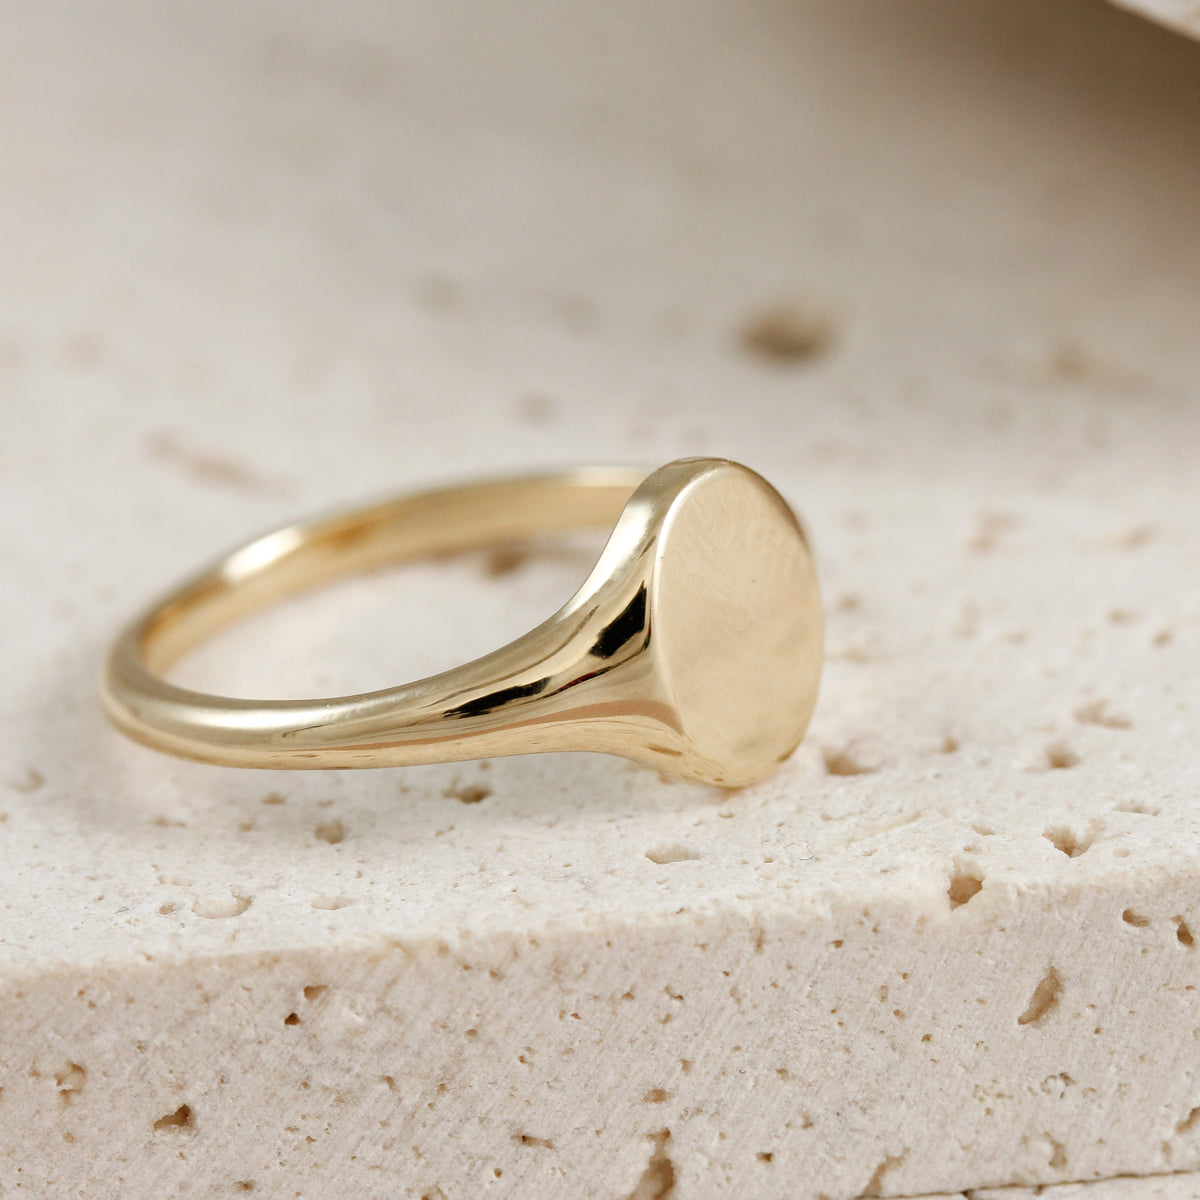 7mm x 9mm oval solid gold signet ring